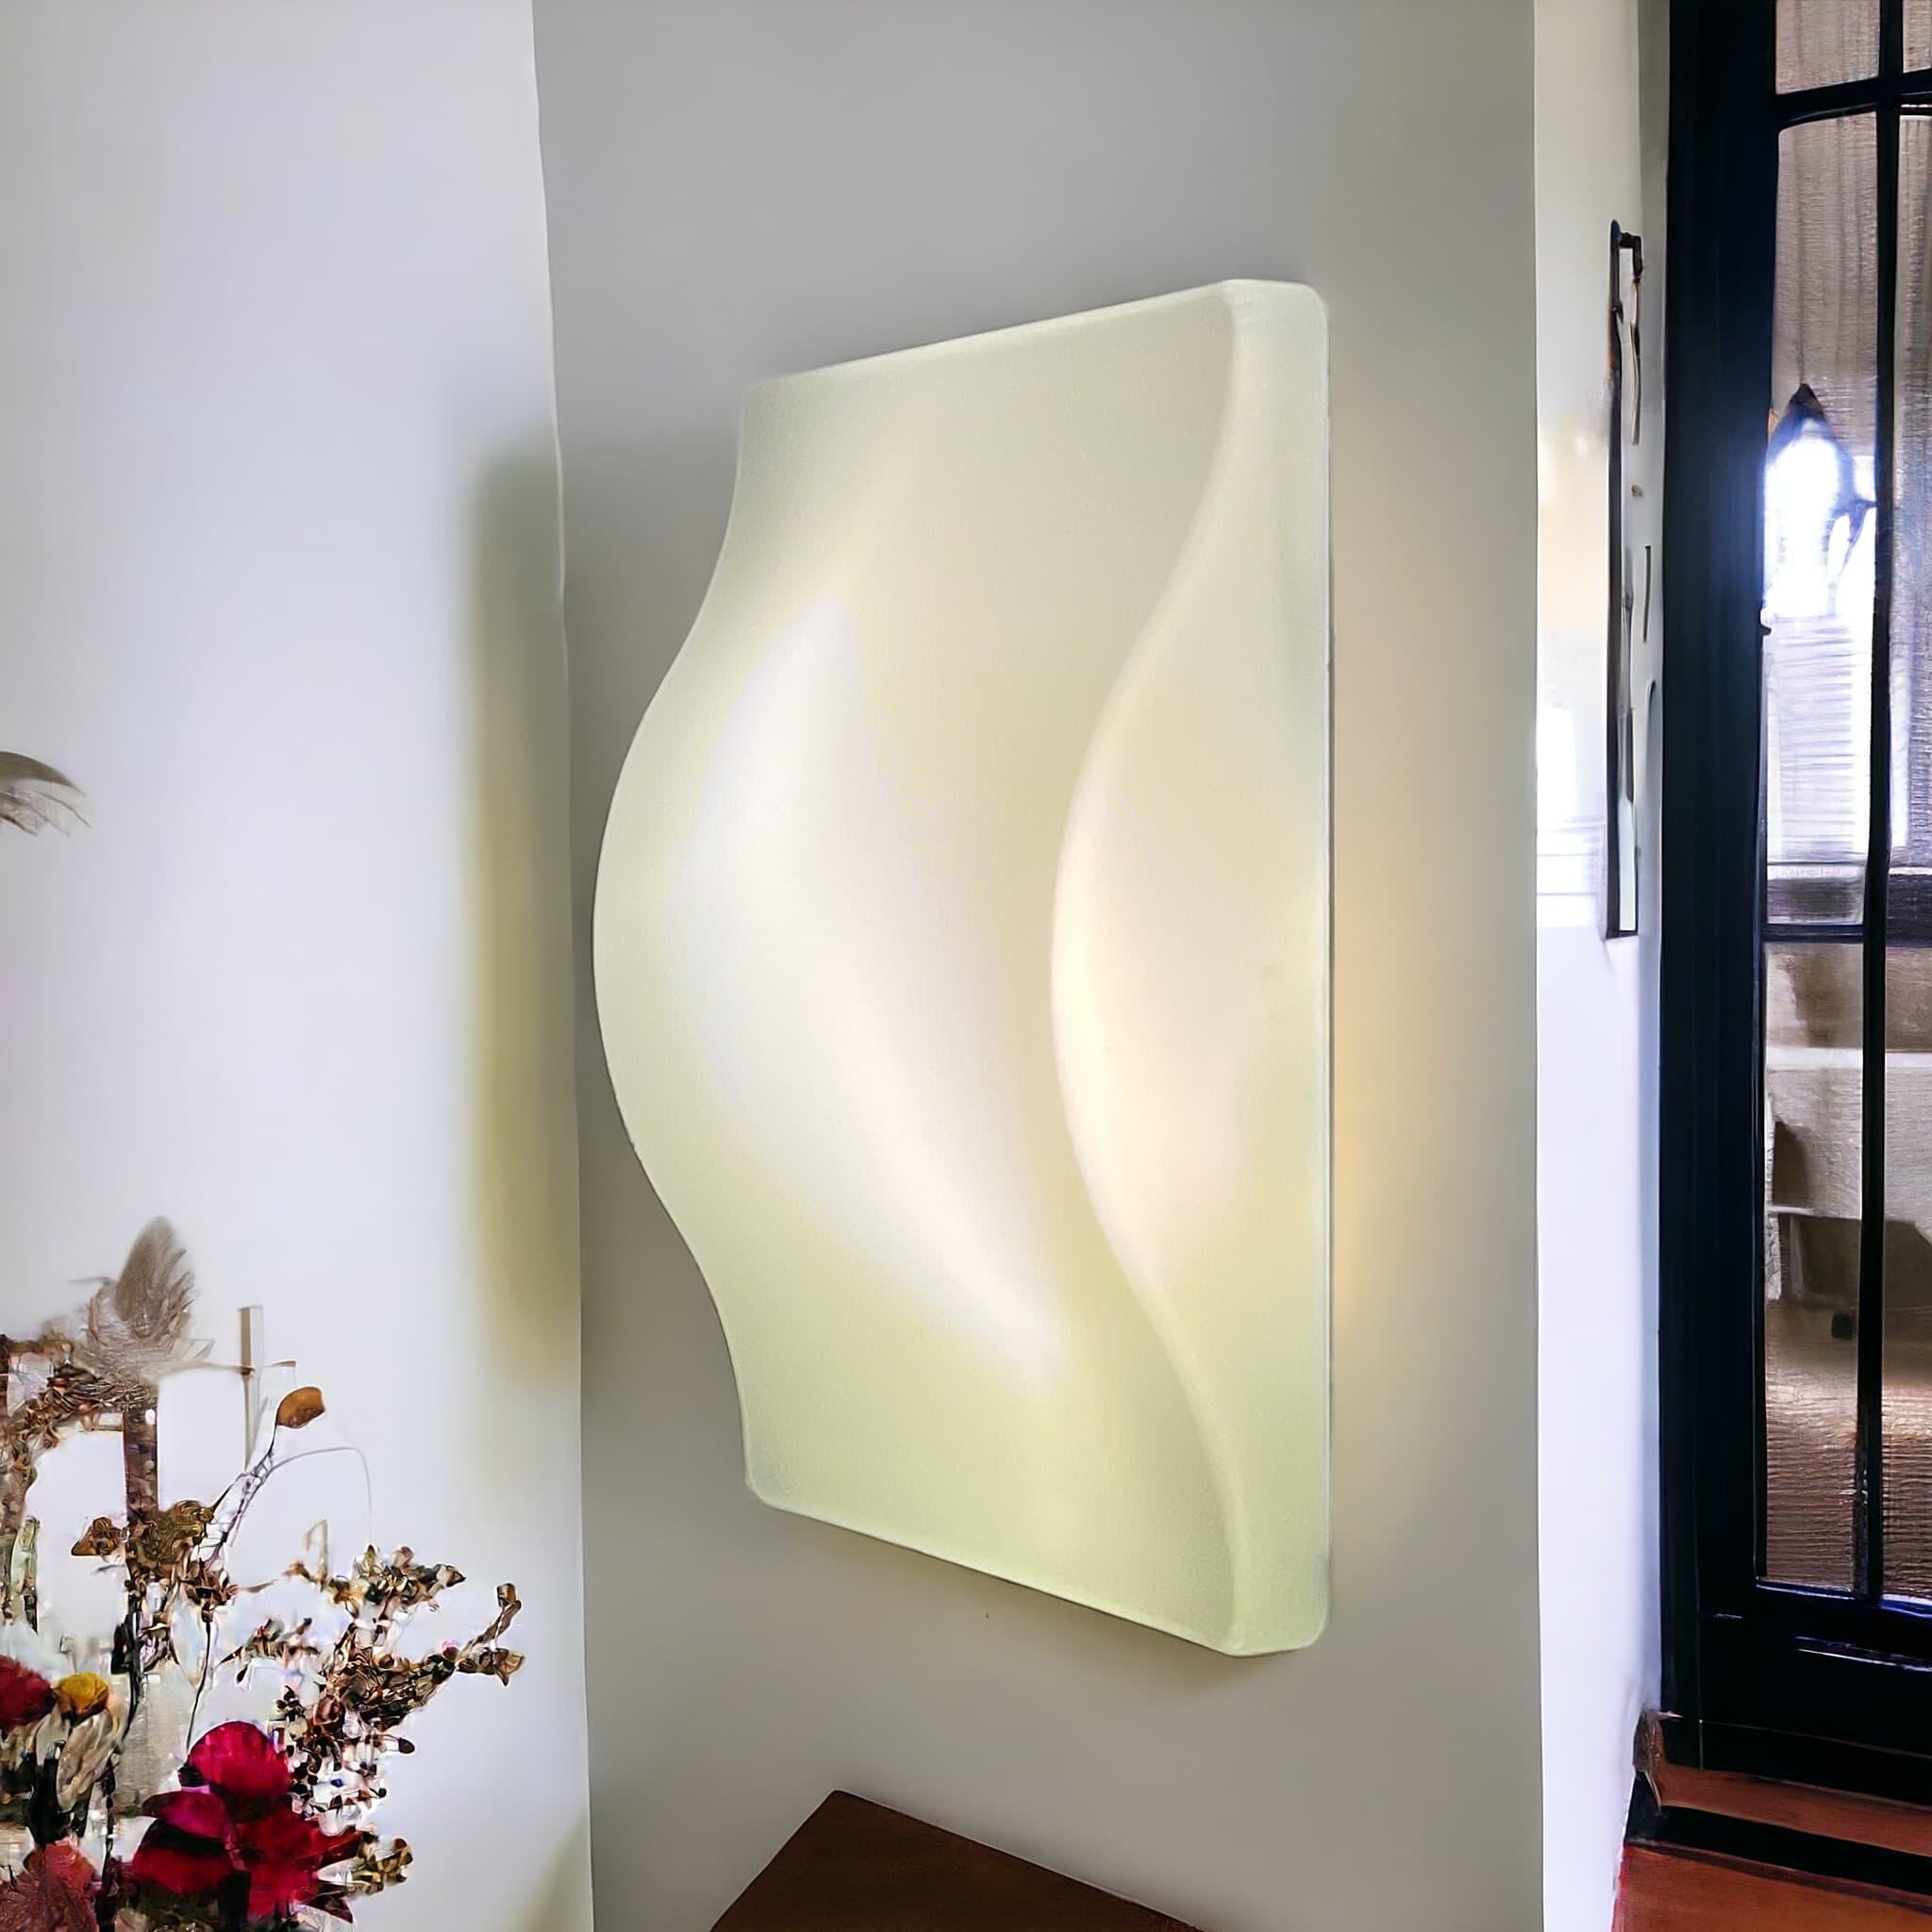 Boasting a sinuous shape and a translucent white hue, this lamp exudes timeless sophistication and versatility. Its generous size makes it perfect for illuminating large rooms or studios, whether mounted on the wall or ceiling. Whether used as a